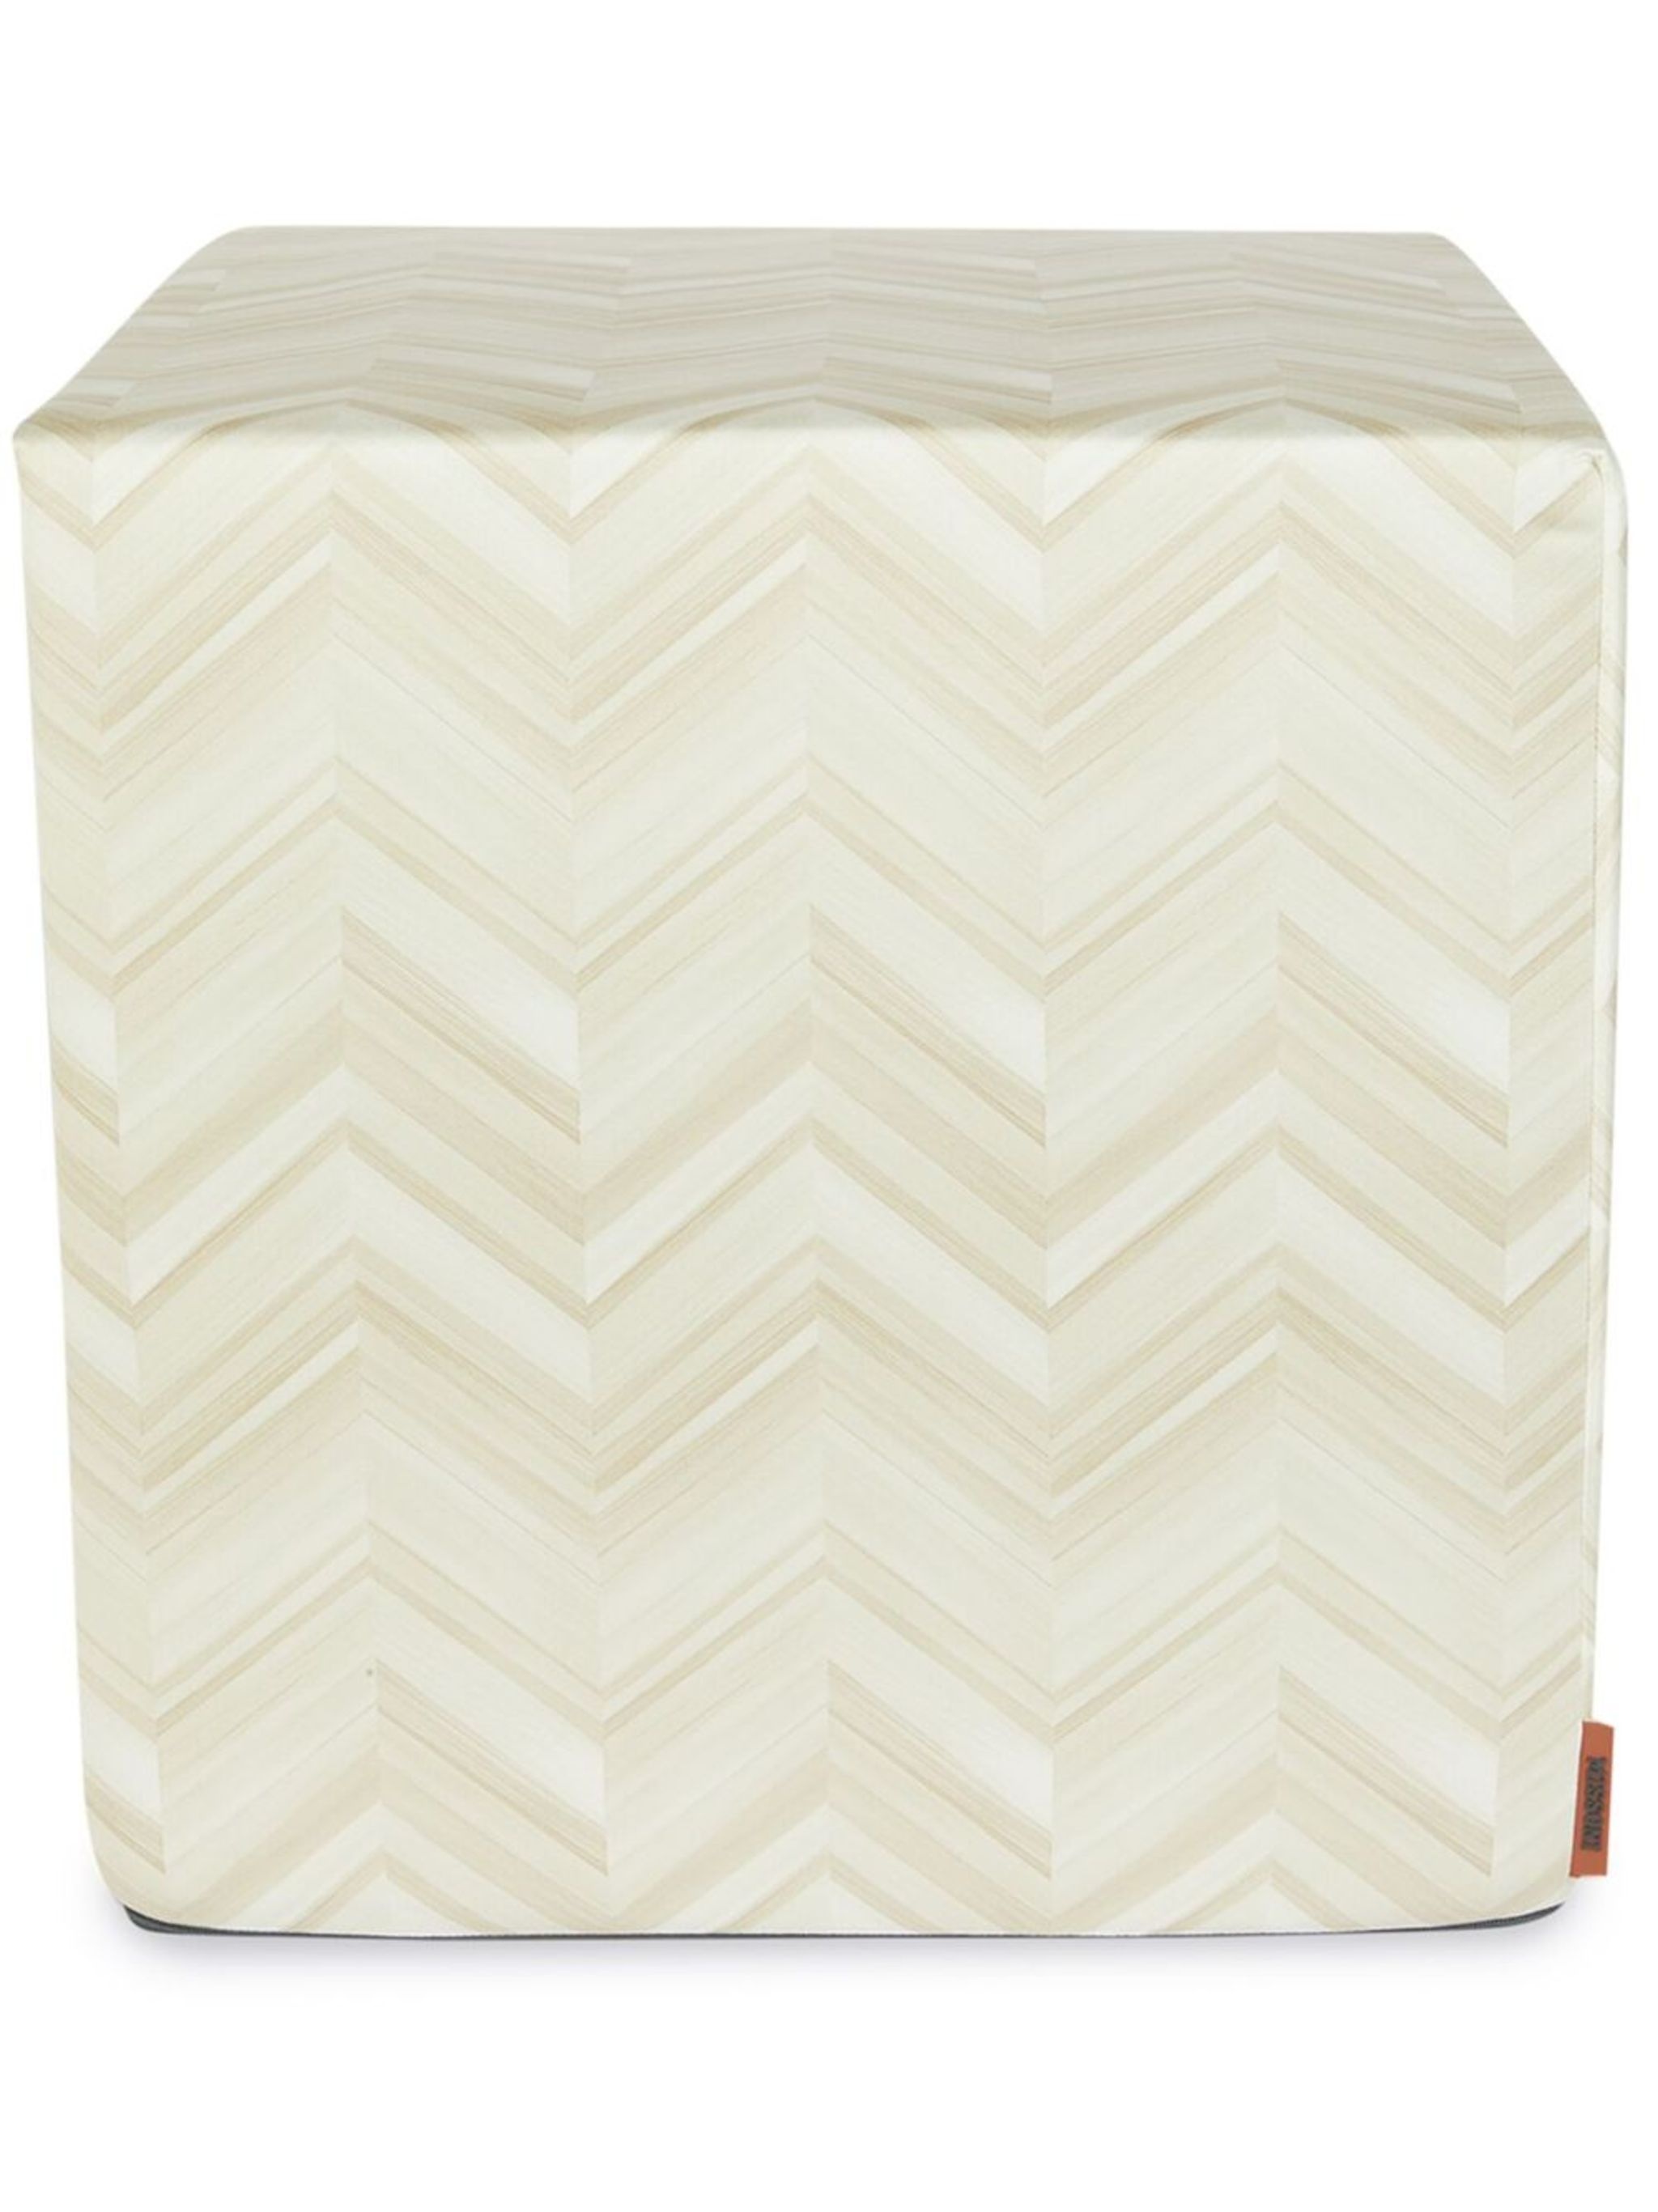 Layers Inlay cubic pouf - 1